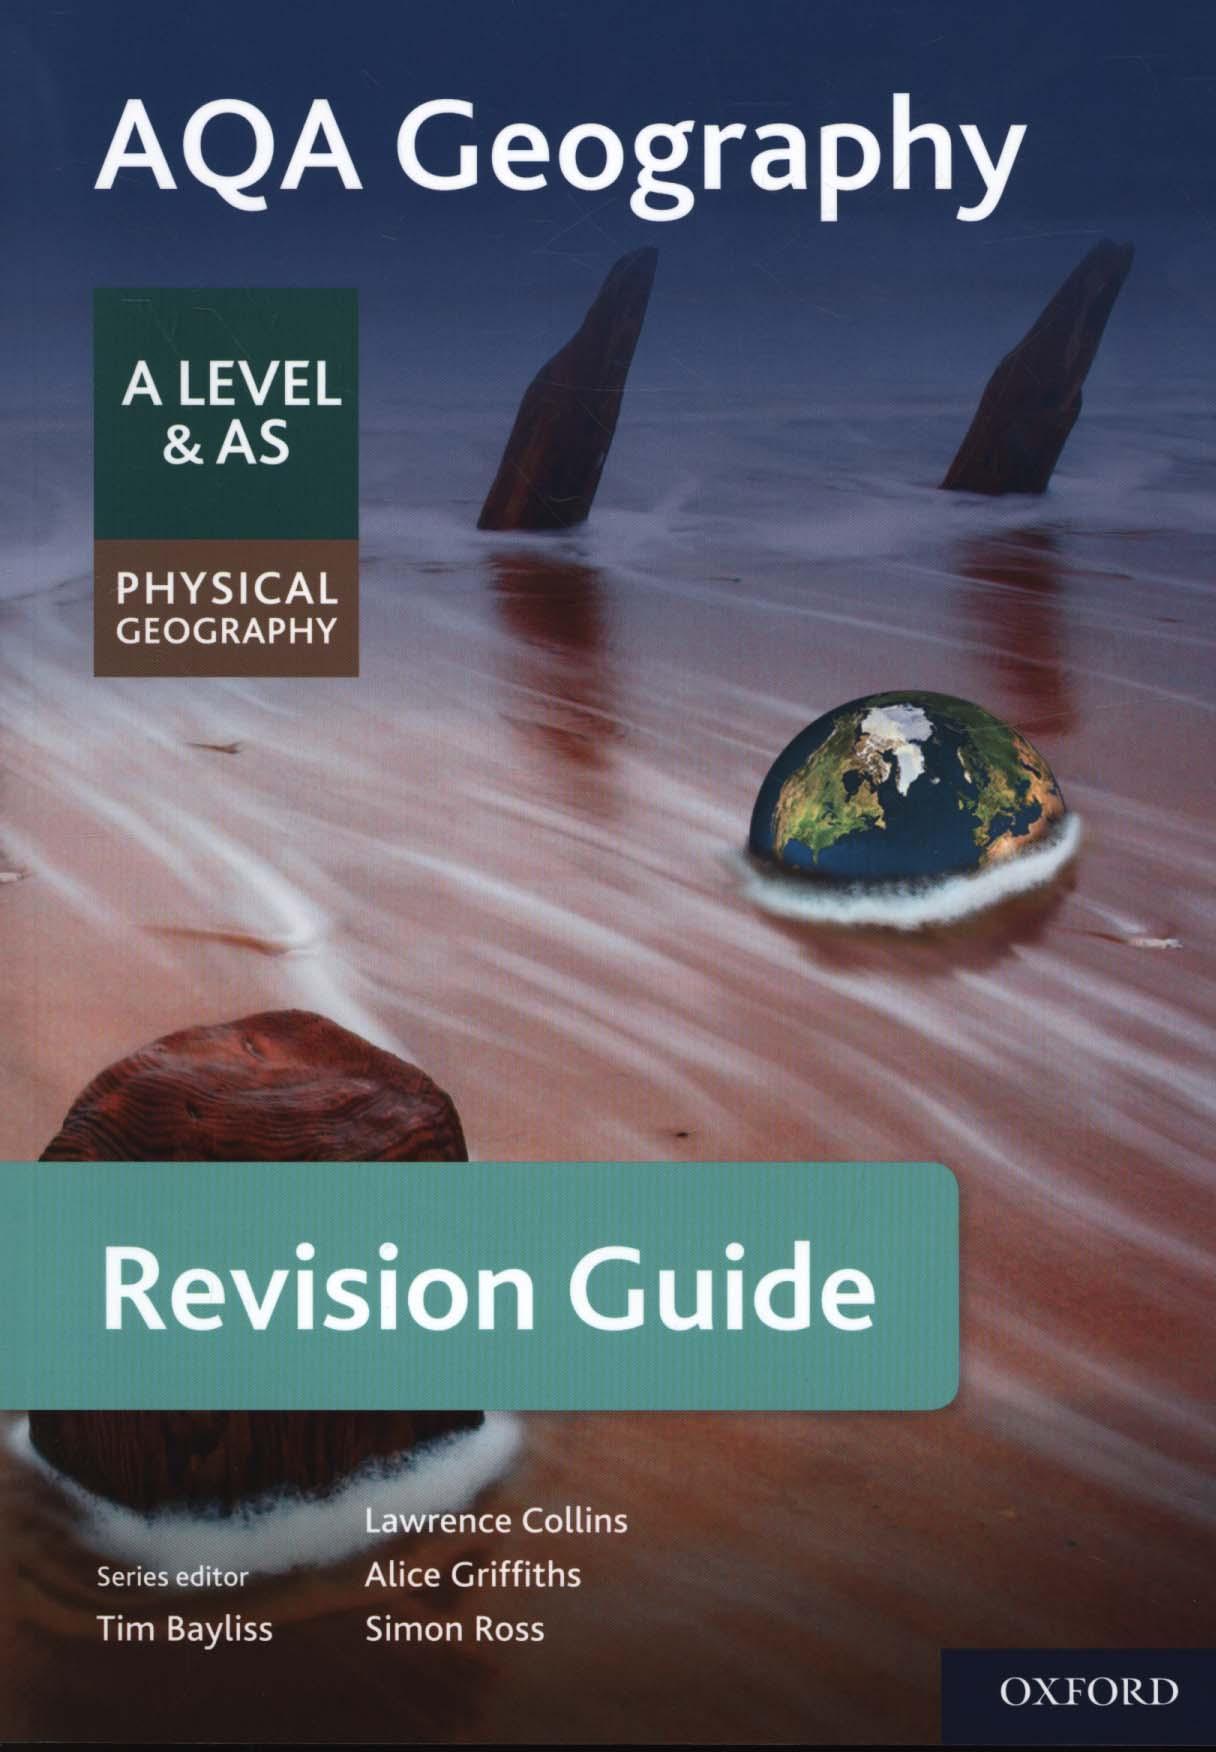 AQA Geography for A Level & AS Physical Geography Revision G